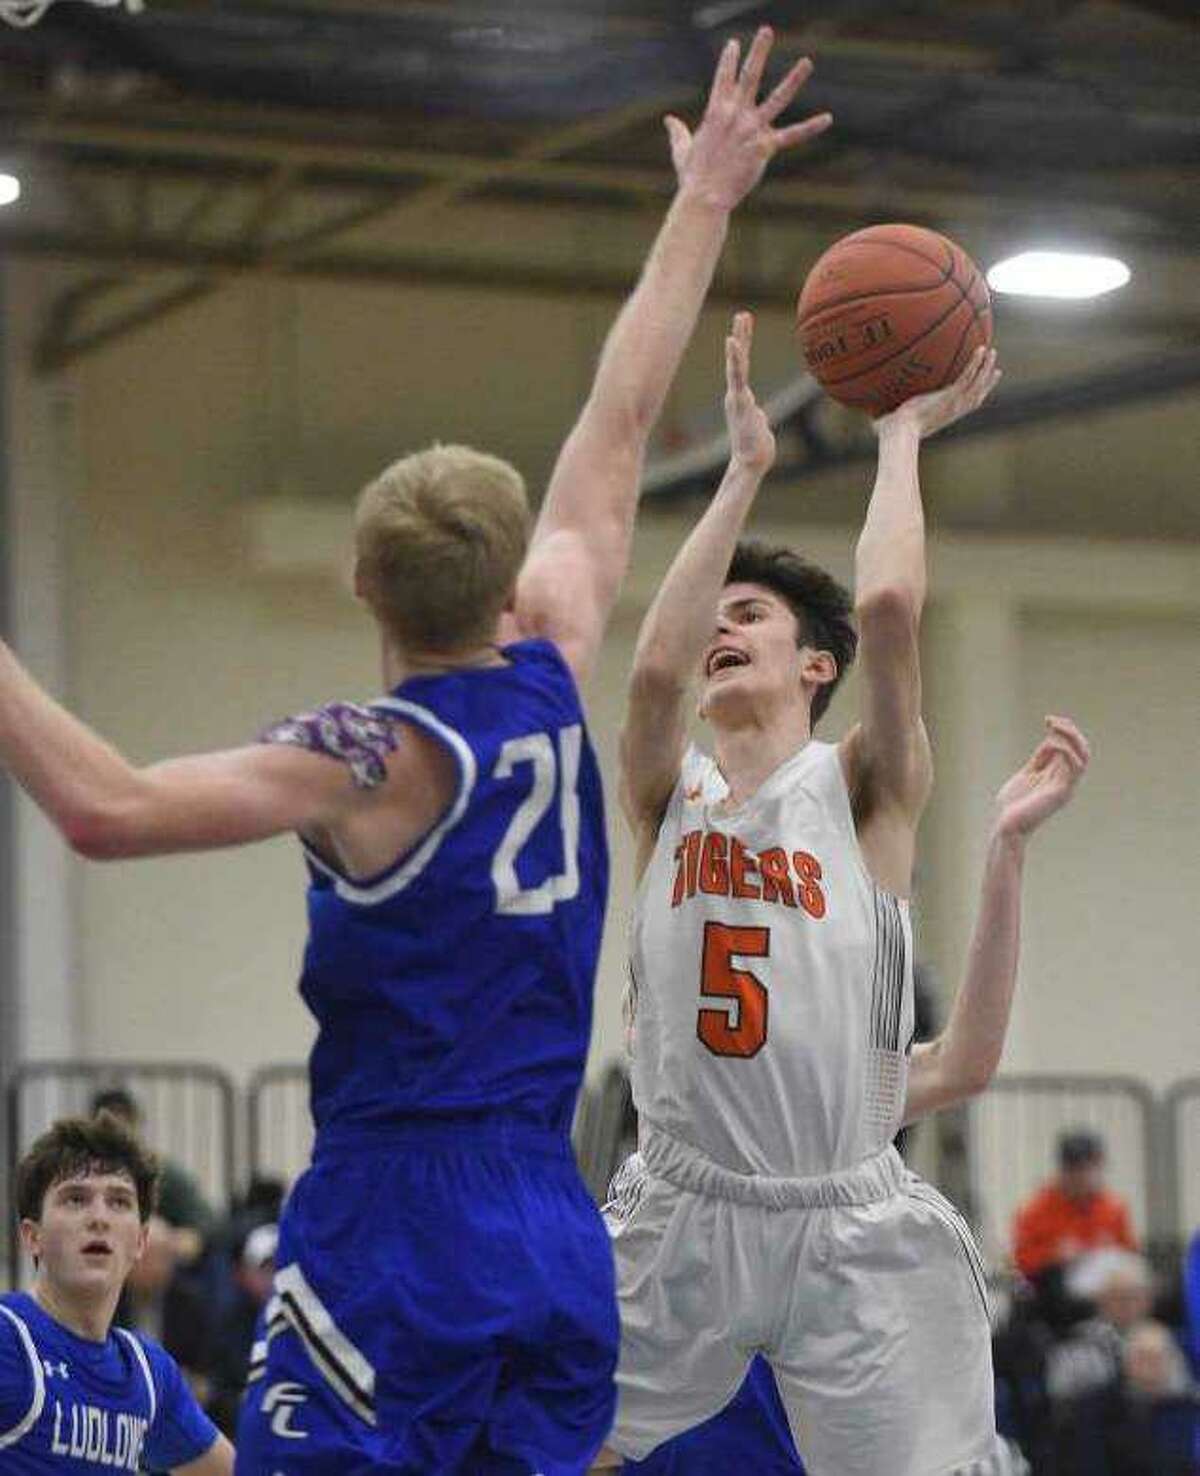 Amos Grey looks to take a shot during Ridgefield's win over Fairfield Ludlowe in the FCIAC semifinals.